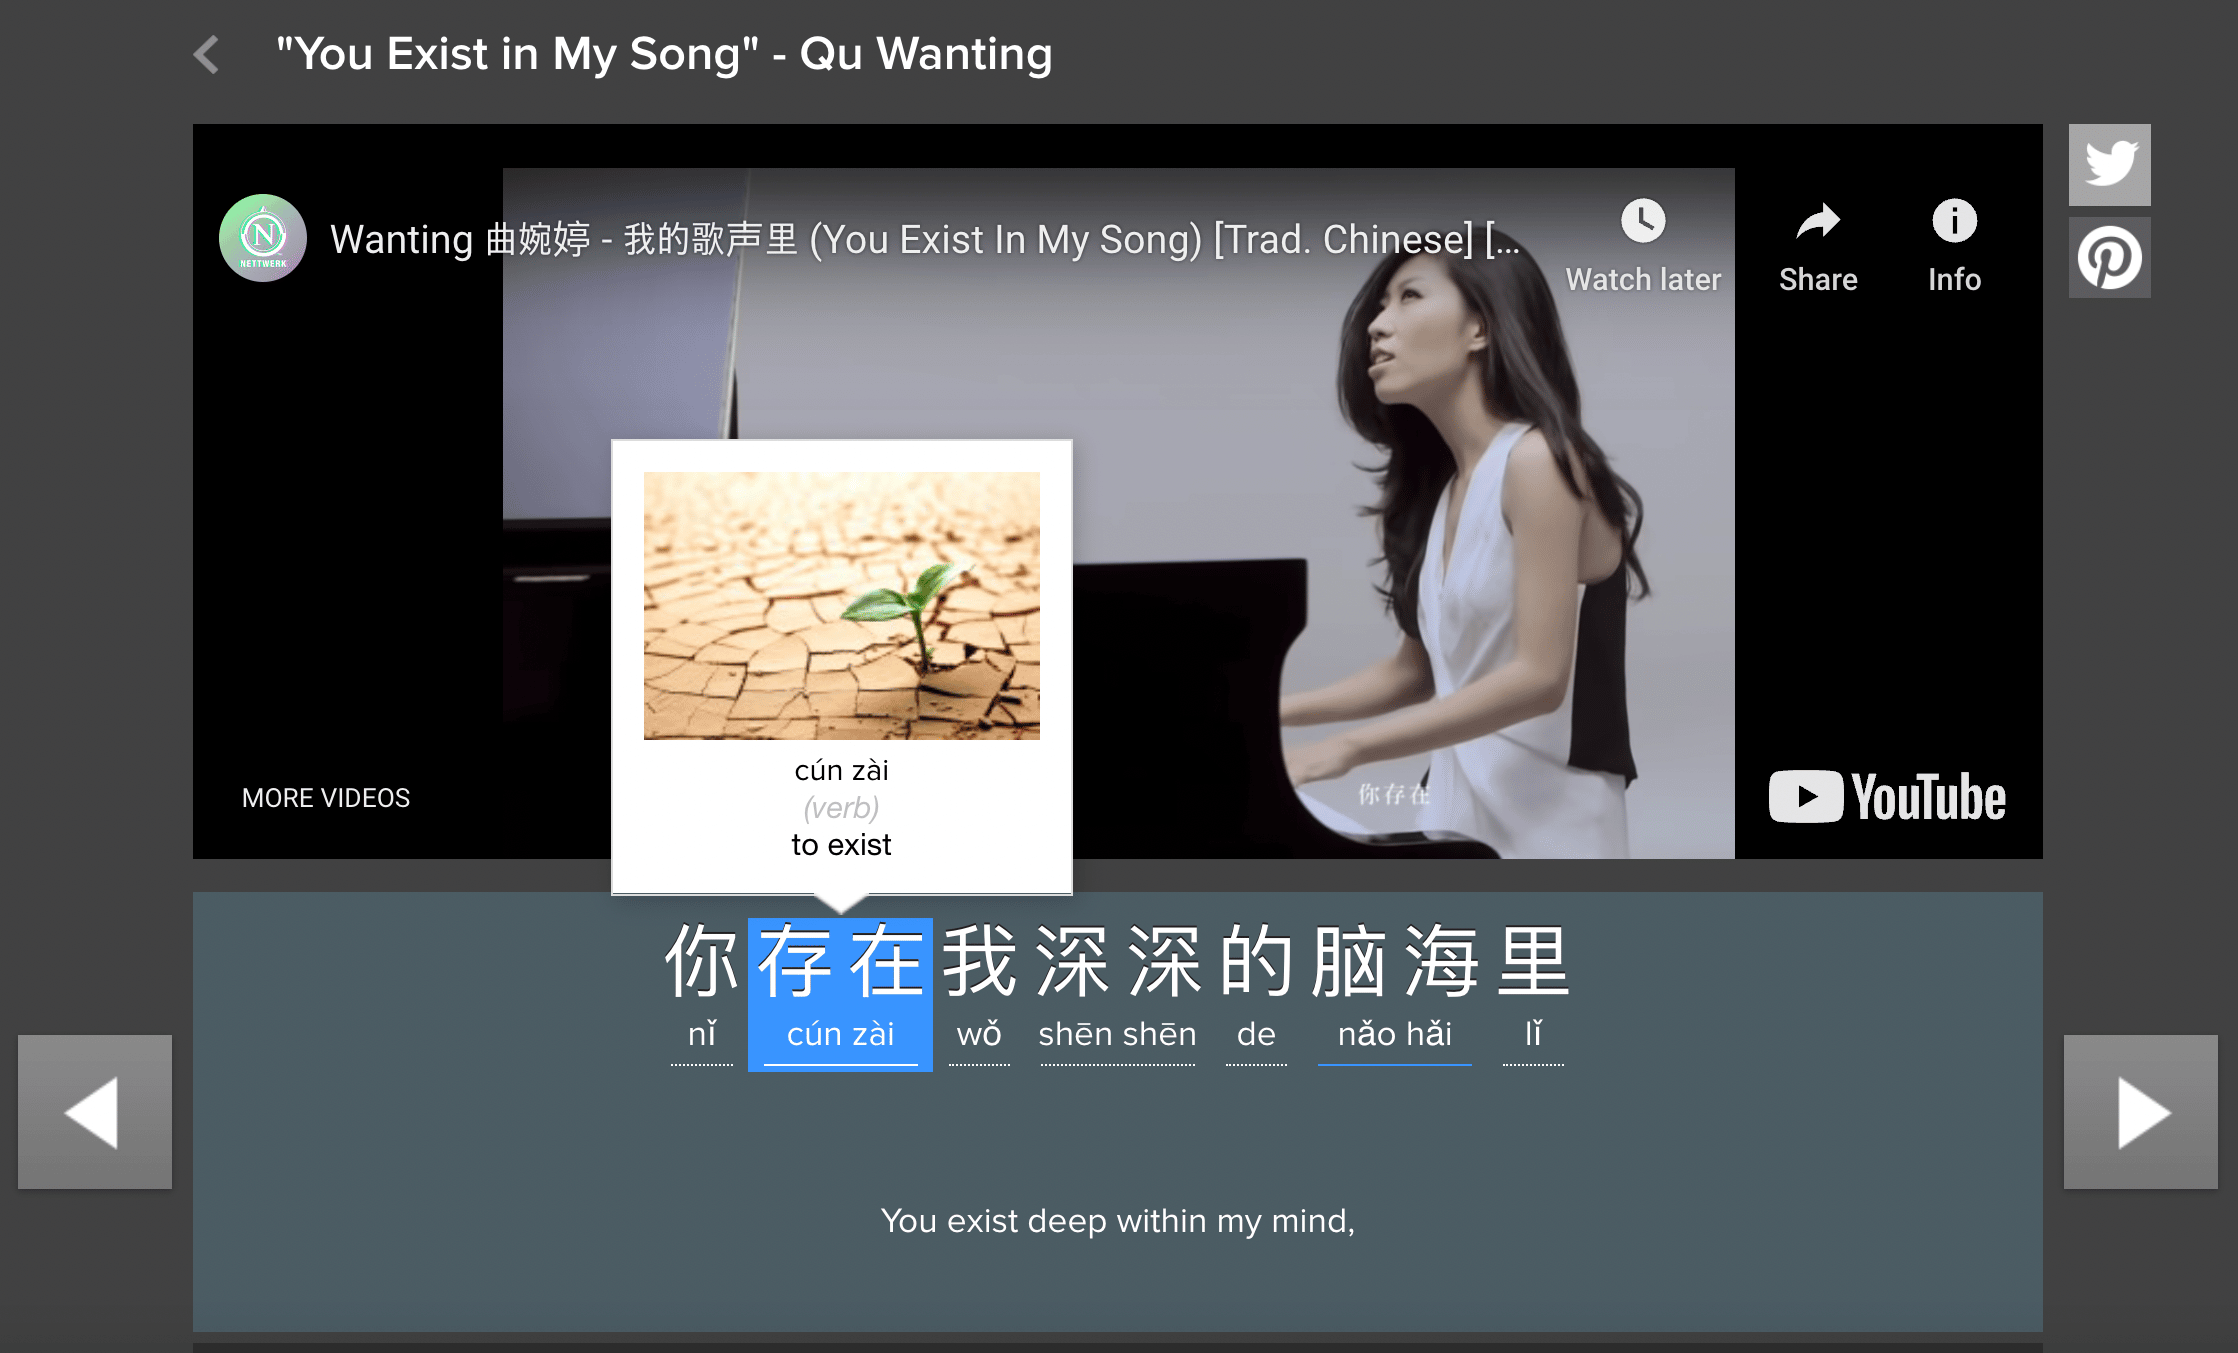 best Chinese songs example, Qu Wanting "you exist in my song"